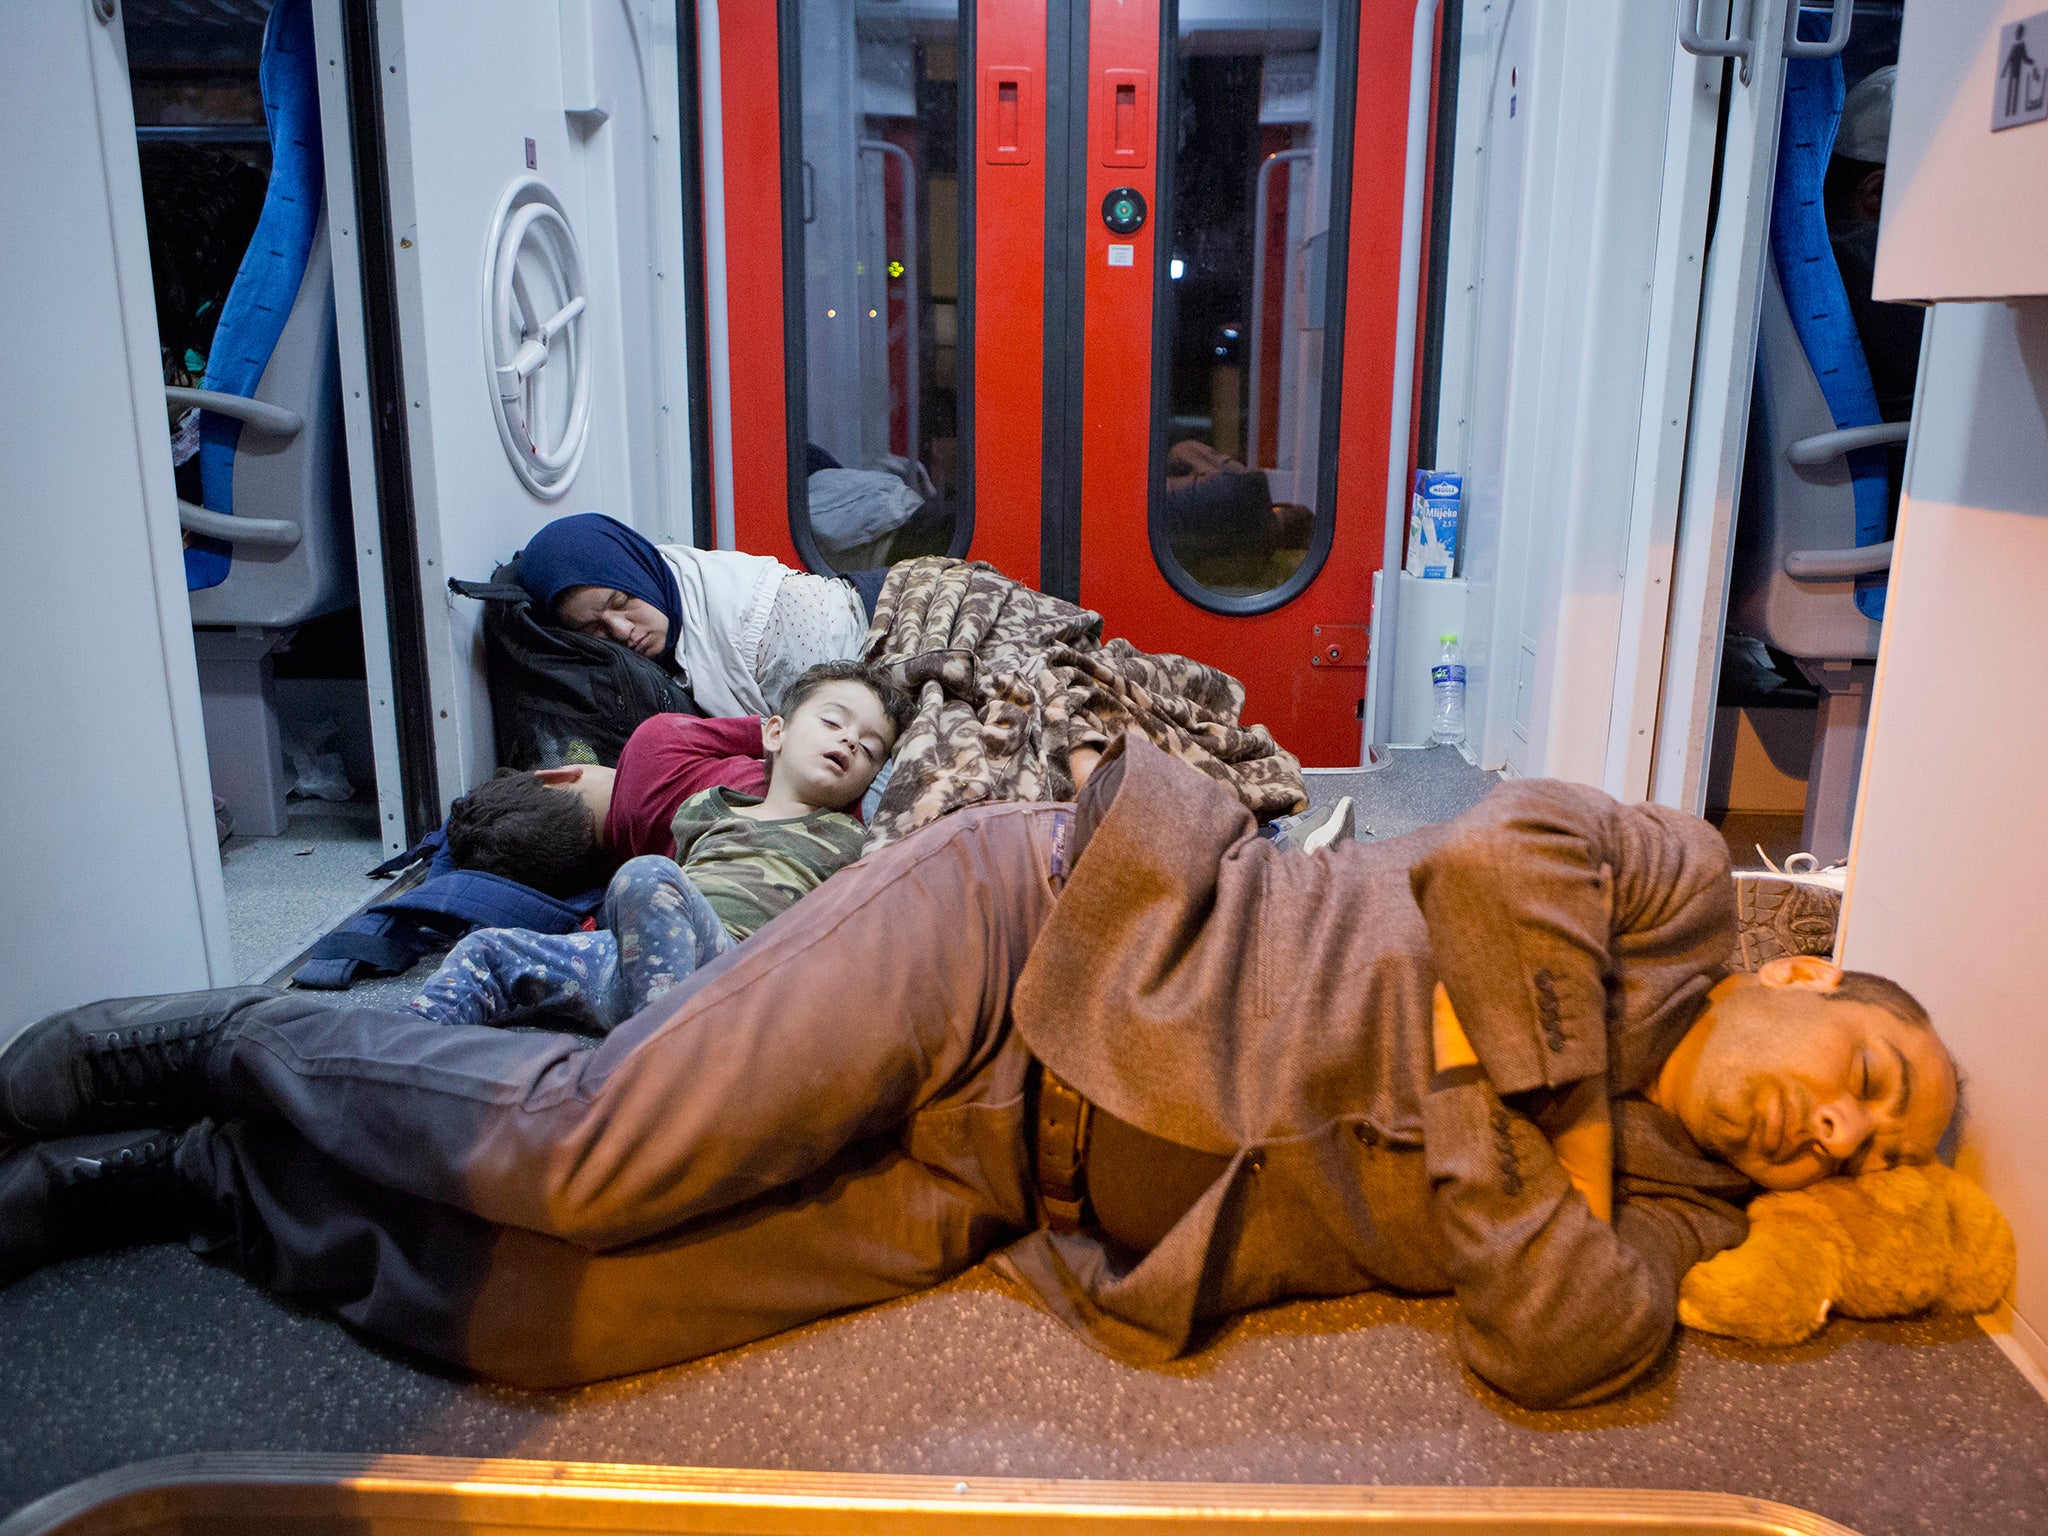 Refugees rest in a train at the railway station in Beli Manastir, near the Hungarian border, northeast Croatia, early Friday, Sept. 18, 2015